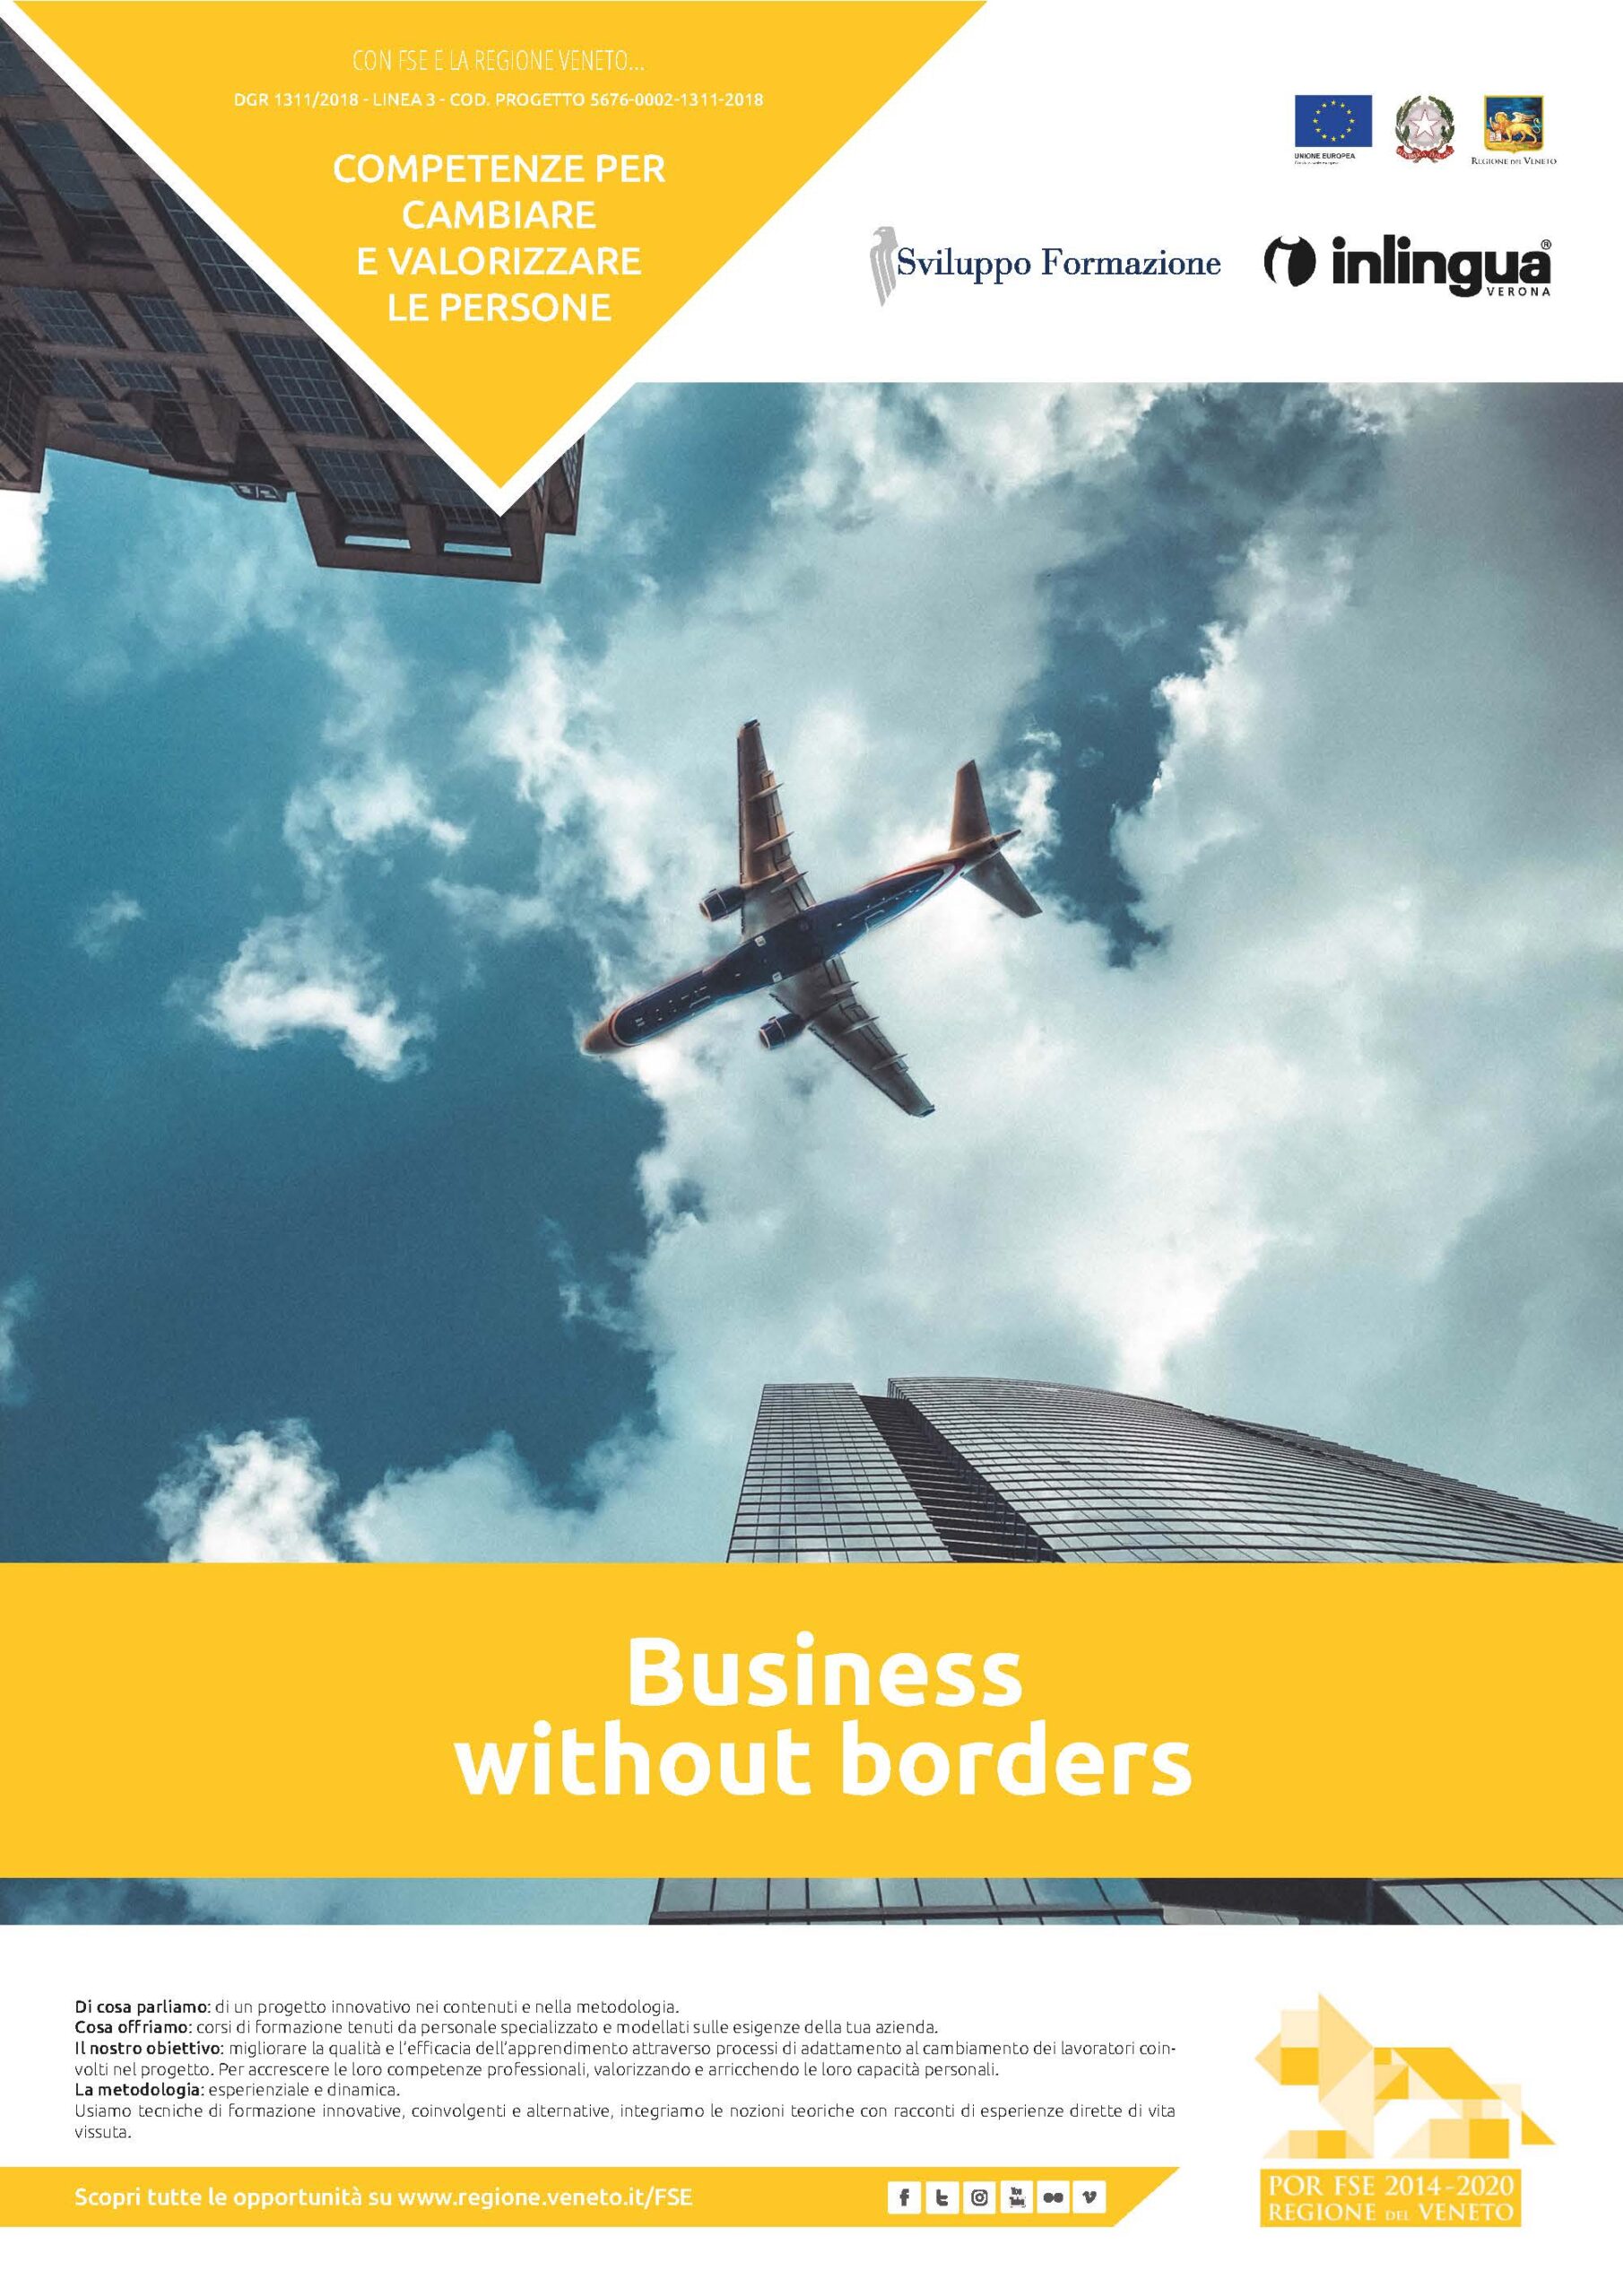 DGR 1311/2018: business without borders